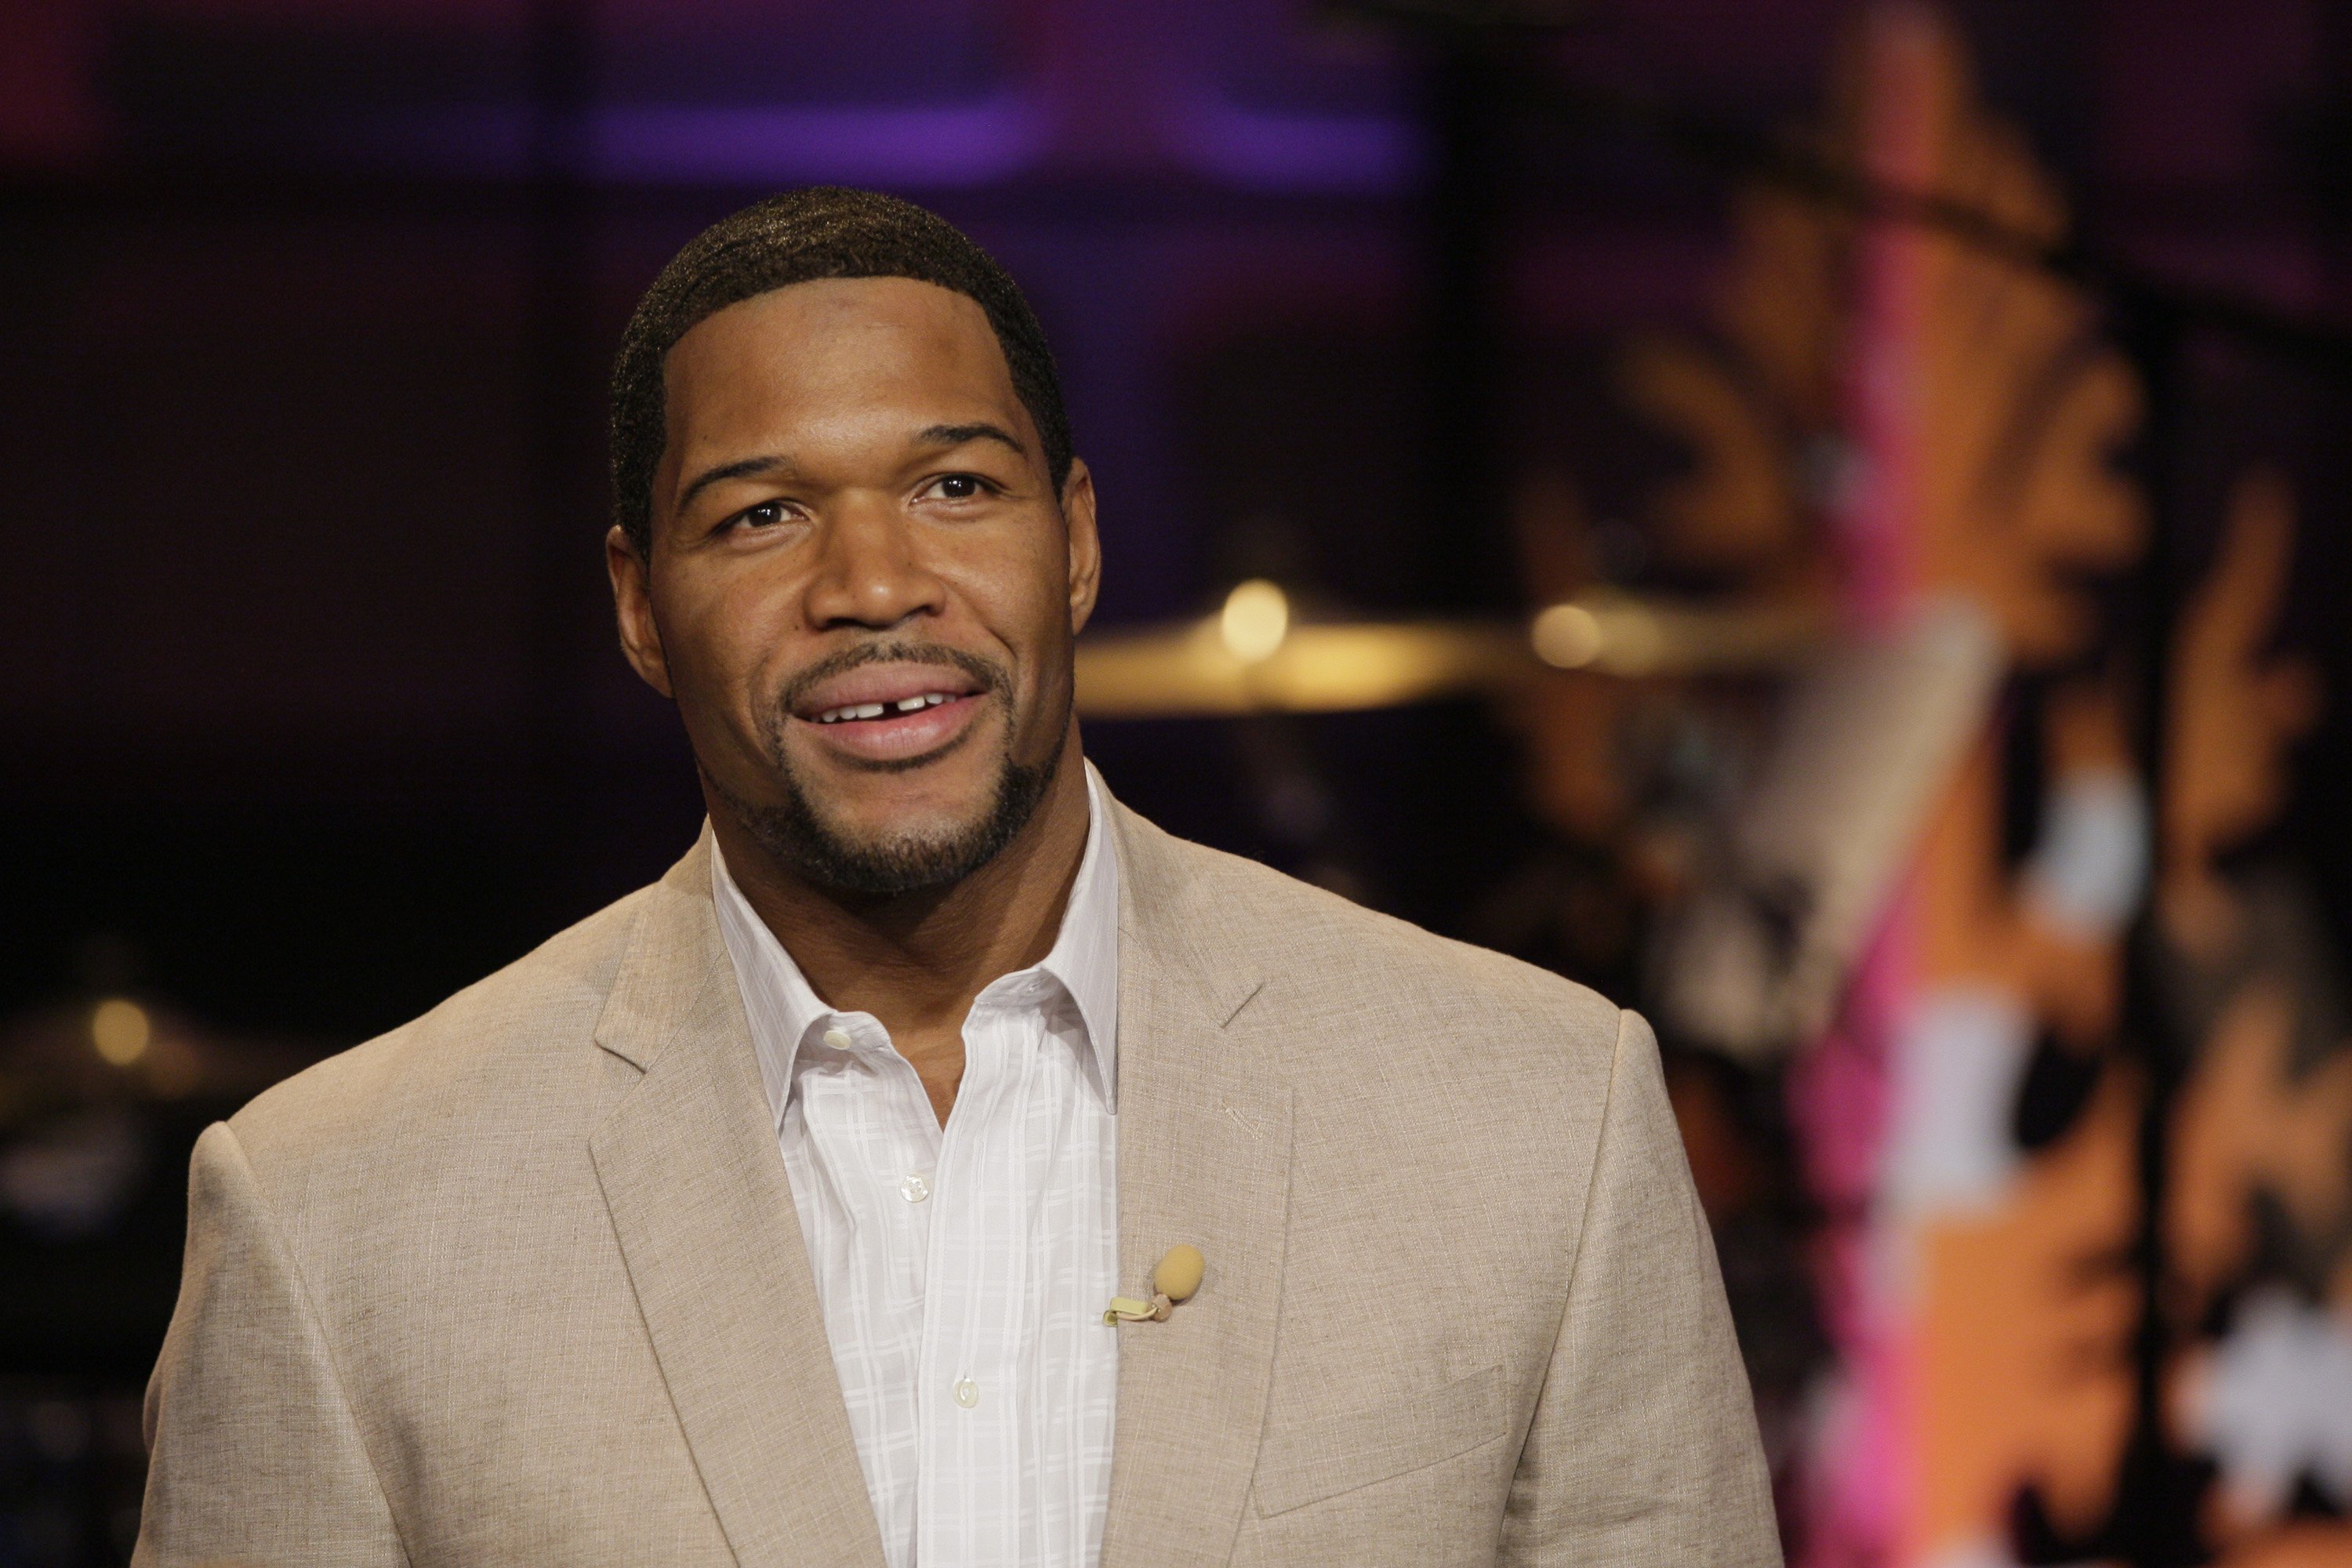 Former football player Michael Strahan on "The Tonight Show with Jay Leno" Season 22 in December 20, 2013. Photo: Getty Images